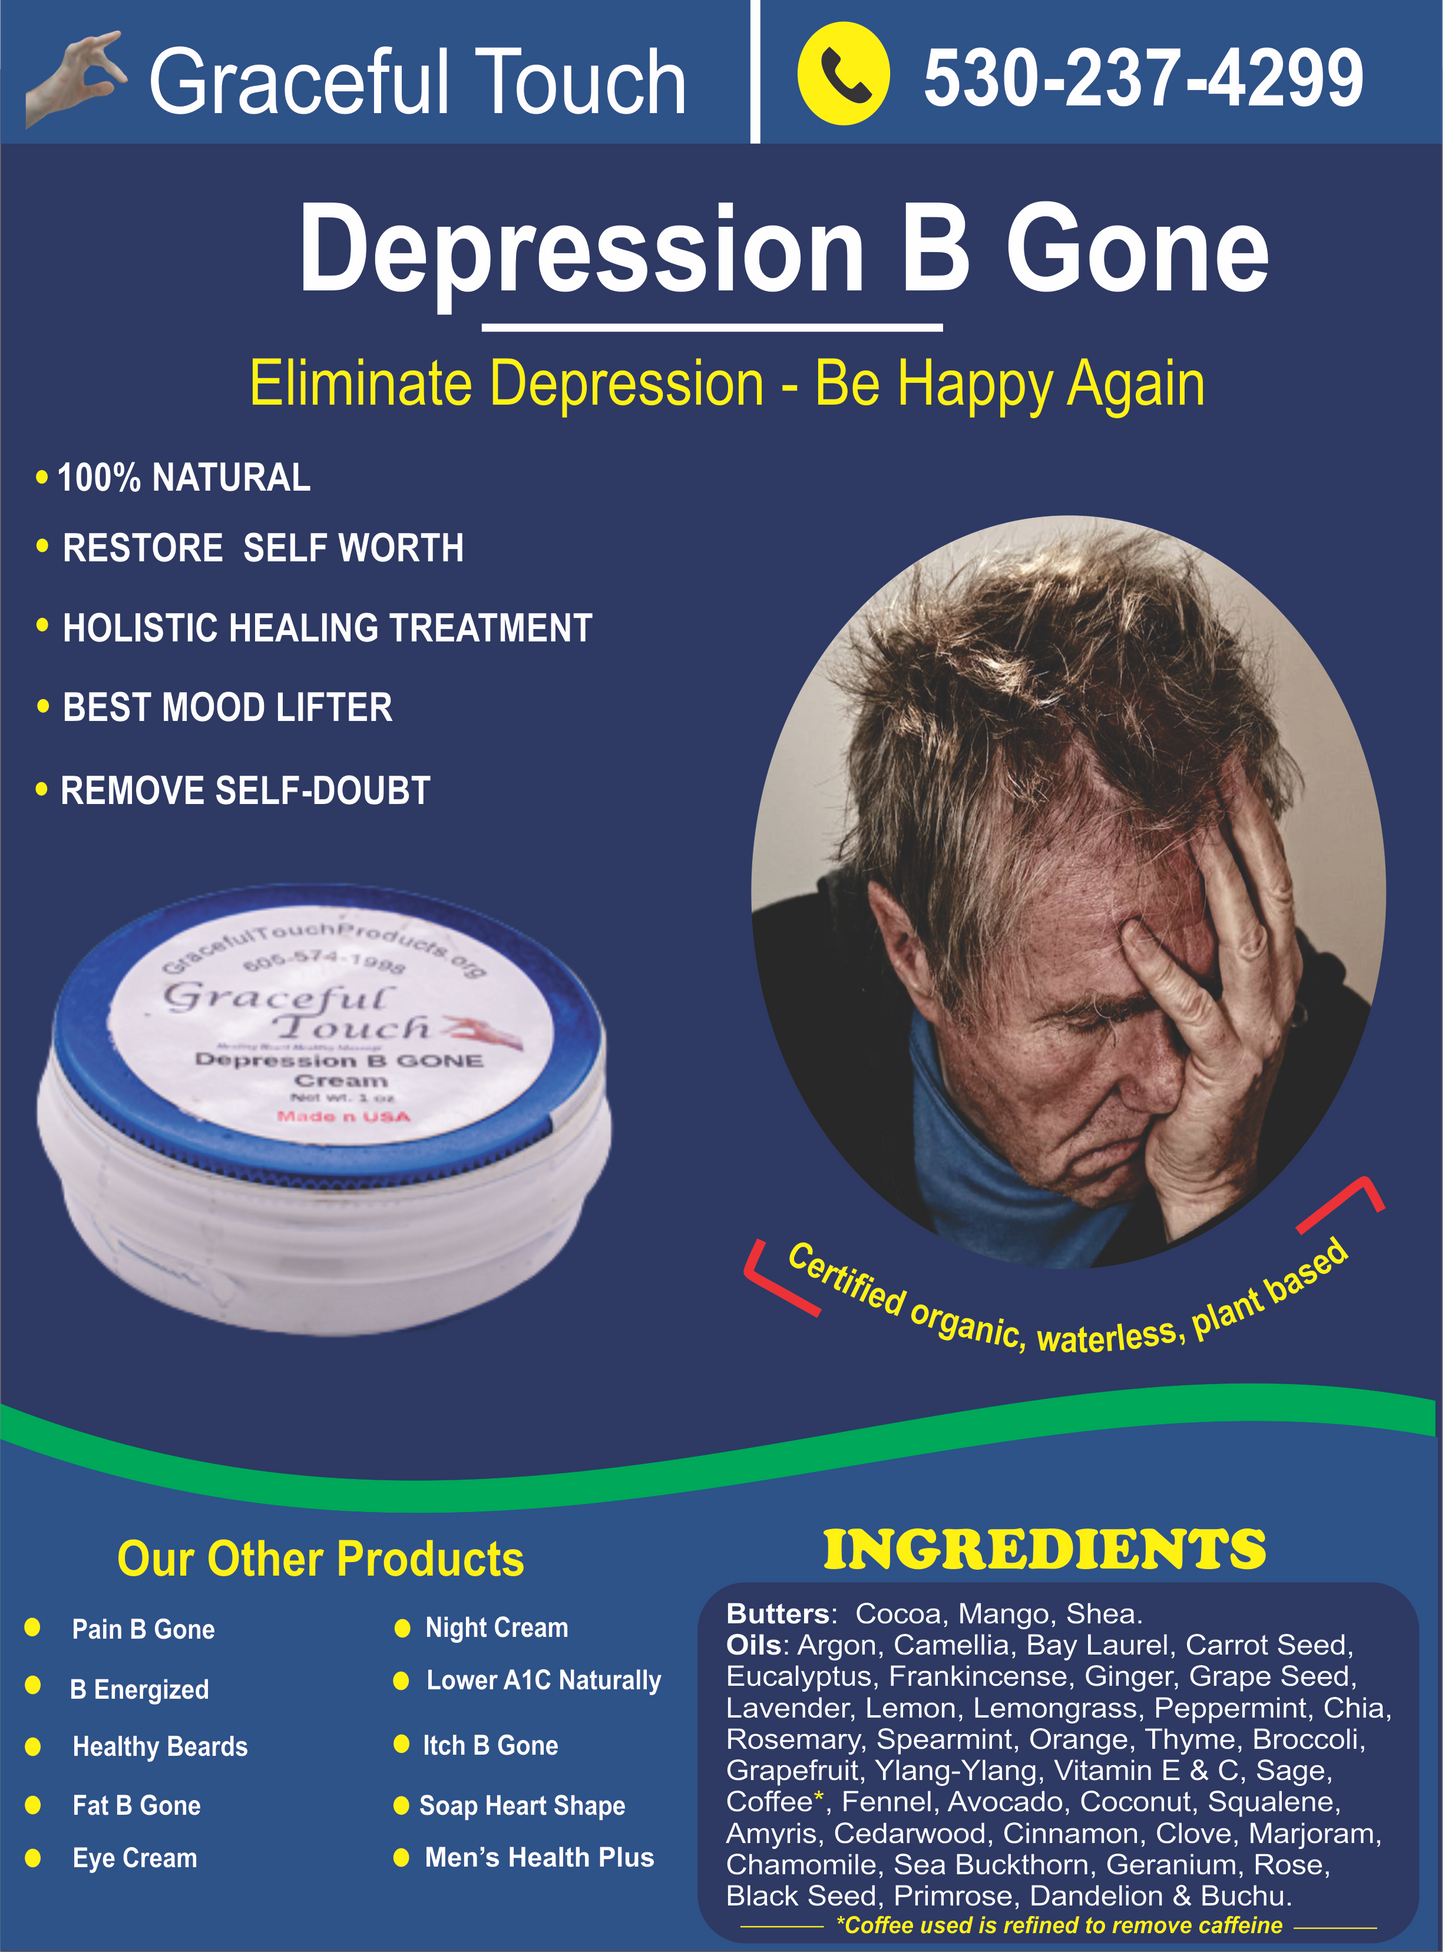 Progesterone cream for anxiety and depression (Depression B Gone)